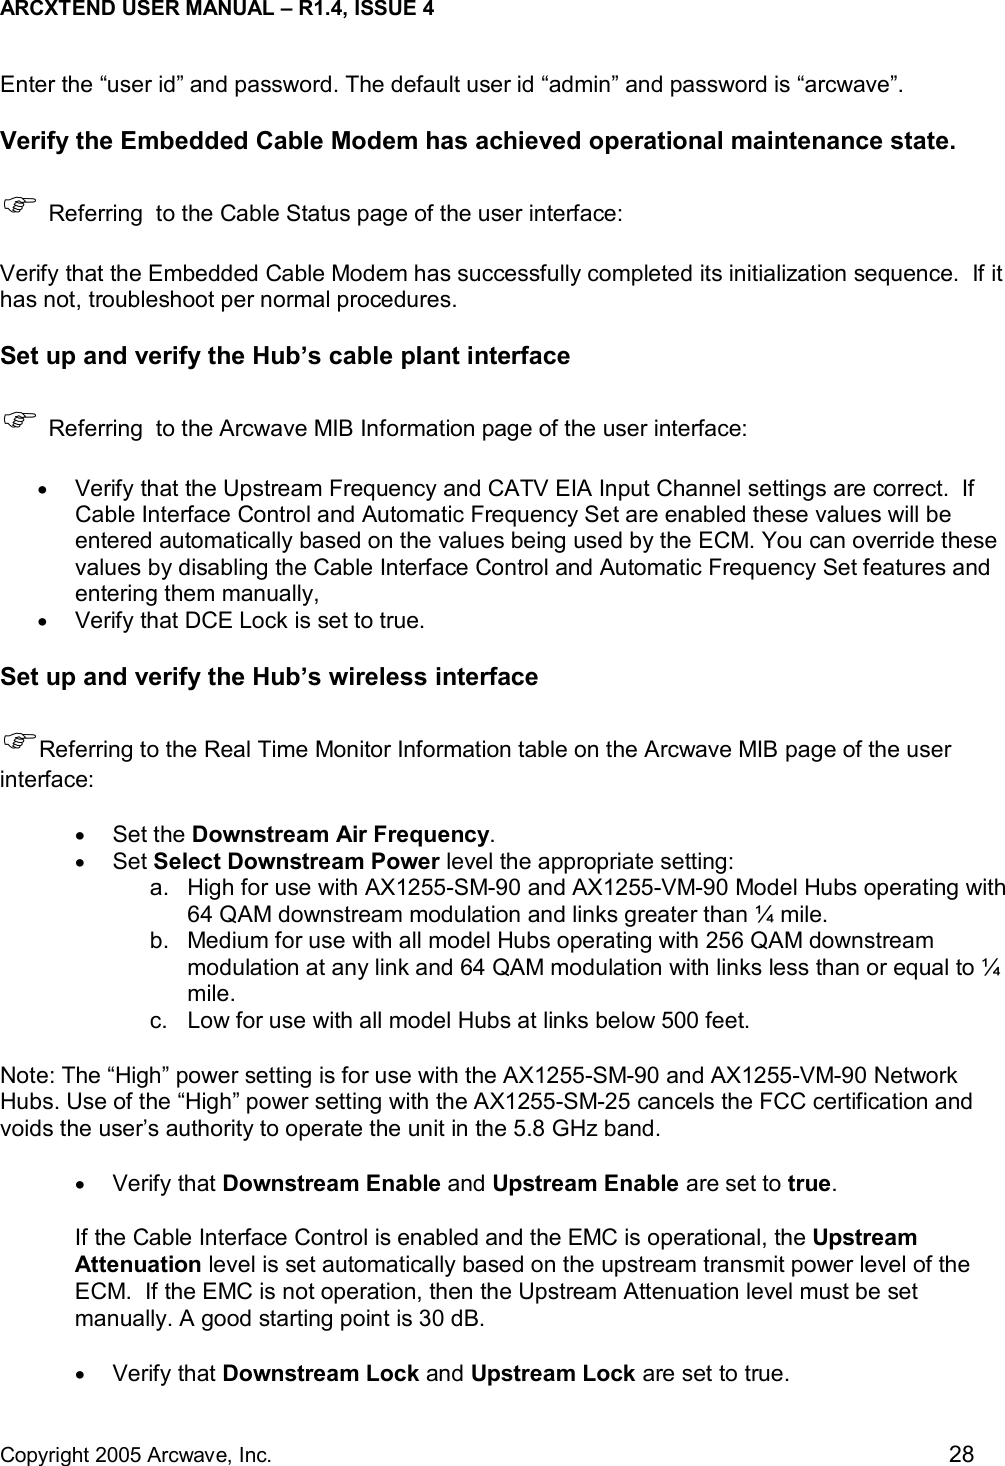 ARCXTEND USER MANUAL – R1.4, ISSUE 4  Copyright 2005 Arcwave, Inc.    28 Enter the “user id” and password. The default user id “admin” and password is “arcwave”.  Verify the Embedded Cable Modem has achieved operational maintenance state.  ) Referring  to the Cable Status page of the user interface: Verify that the Embedded Cable Modem has successfully completed its initialization sequence.  If it has not, troubleshoot per normal procedures. Set up and verify the Hub’s cable plant interface ) Referring  to the Arcwave MIB Information page of the user interface:  •  Verify that the Upstream Frequency and CATV EIA Input Channel settings are correct.  If Cable Interface Control and Automatic Frequency Set are enabled these values will be entered automatically based on the values being used by the ECM. You can override these values by disabling the Cable Interface Control and Automatic Frequency Set features and entering them manually,  •  Verify that DCE Lock is set to true. Set up and verify the Hub’s wireless interface )Referring to the Real Time Monitor Information table on the Arcwave MIB page of the user interface: •  Set the Downstream Air Frequency. •  Set Select Downstream Power level the appropriate setting: a.  High for use with AX1255-SM-90 and AX1255-VM-90 Model Hubs operating with 64 QAM downstream modulation and links greater than ¼ mile.  b.  Medium for use with all model Hubs operating with 256 QAM downstream modulation at any link and 64 QAM modulation with links less than or equal to ¼ mile. c.  Low for use with all model Hubs at links below 500 feet.   Note: The “High” power setting is for use with the AX1255-SM-90 and AX1255-VM-90 Network Hubs. Use of the “High” power setting with the AX1255-SM-25 cancels the FCC certification and voids the user’s authority to operate the unit in the 5.8 GHz band.  •  Verify that Downstream Enable and Upstream Enable are set to true.  If the Cable Interface Control is enabled and the EMC is operational, the Upstream Attenuation level is set automatically based on the upstream transmit power level of the ECM.  If the EMC is not operation, then the Upstream Attenuation level must be set manually. A good starting point is 30 dB.  •  Verify that Downstream Lock and Upstream Lock are set to true.   